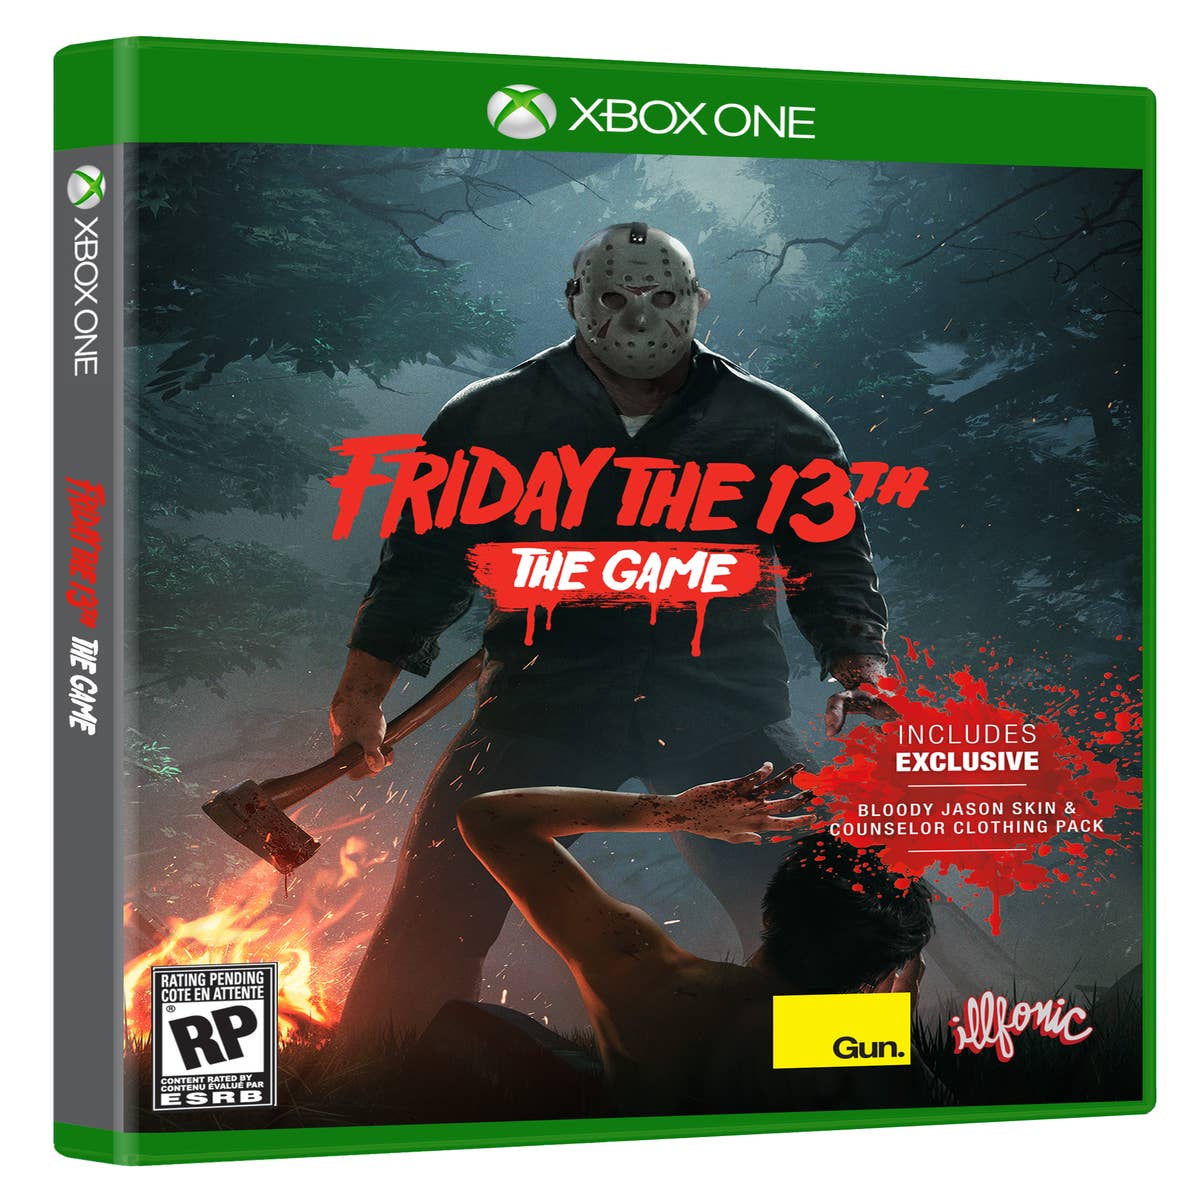 Friday the 13th: The Game Sales Hit Over 1.8 Million Copies